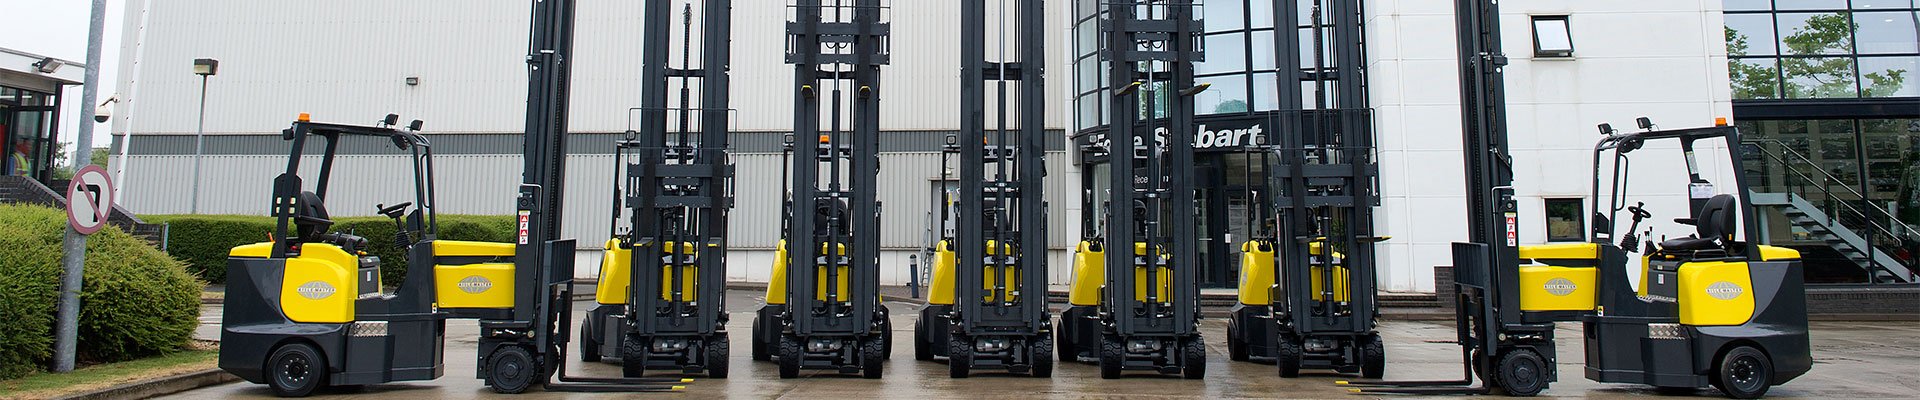 Parts for Aisle Master narrow aisle forklifts